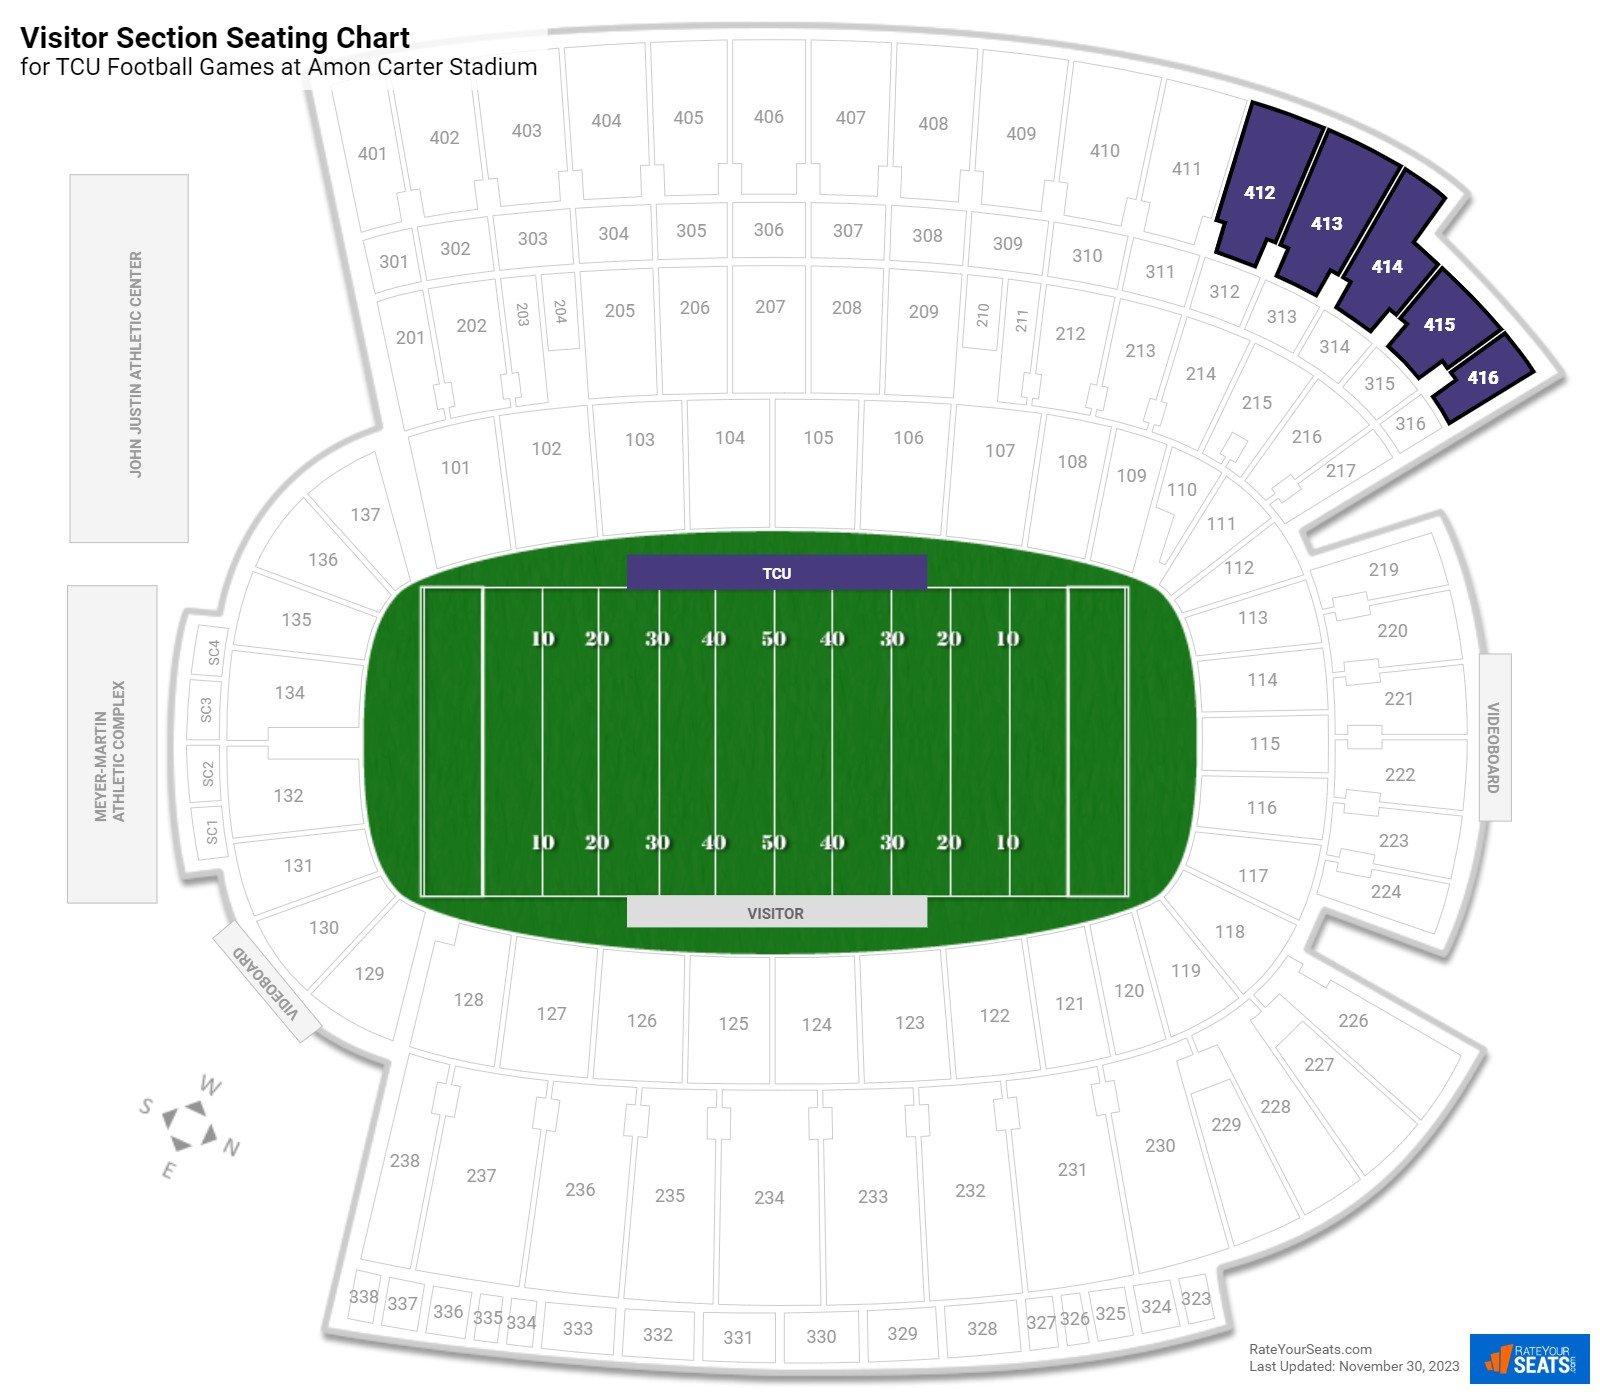 Visitor Section at Amon Carter Stadium - RateYourSeats.com